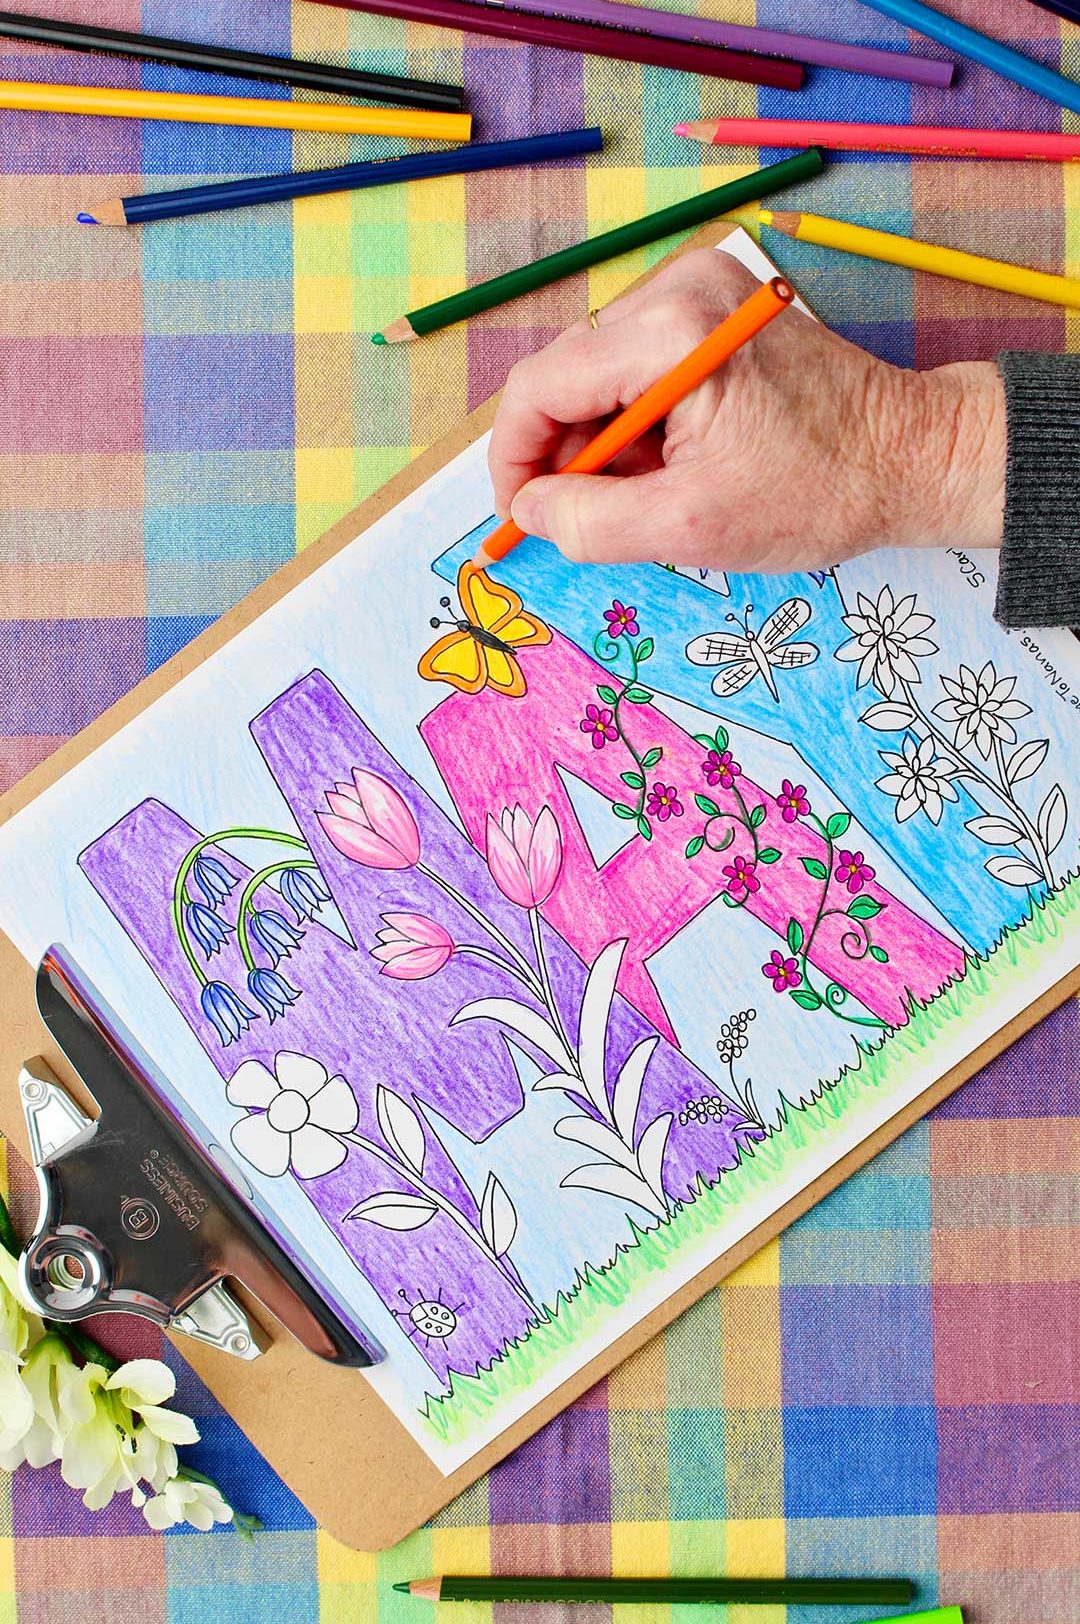 Hand coloring butterfly wings orange in May Coloring Page with colored pencils resting on a colorful plaid background.